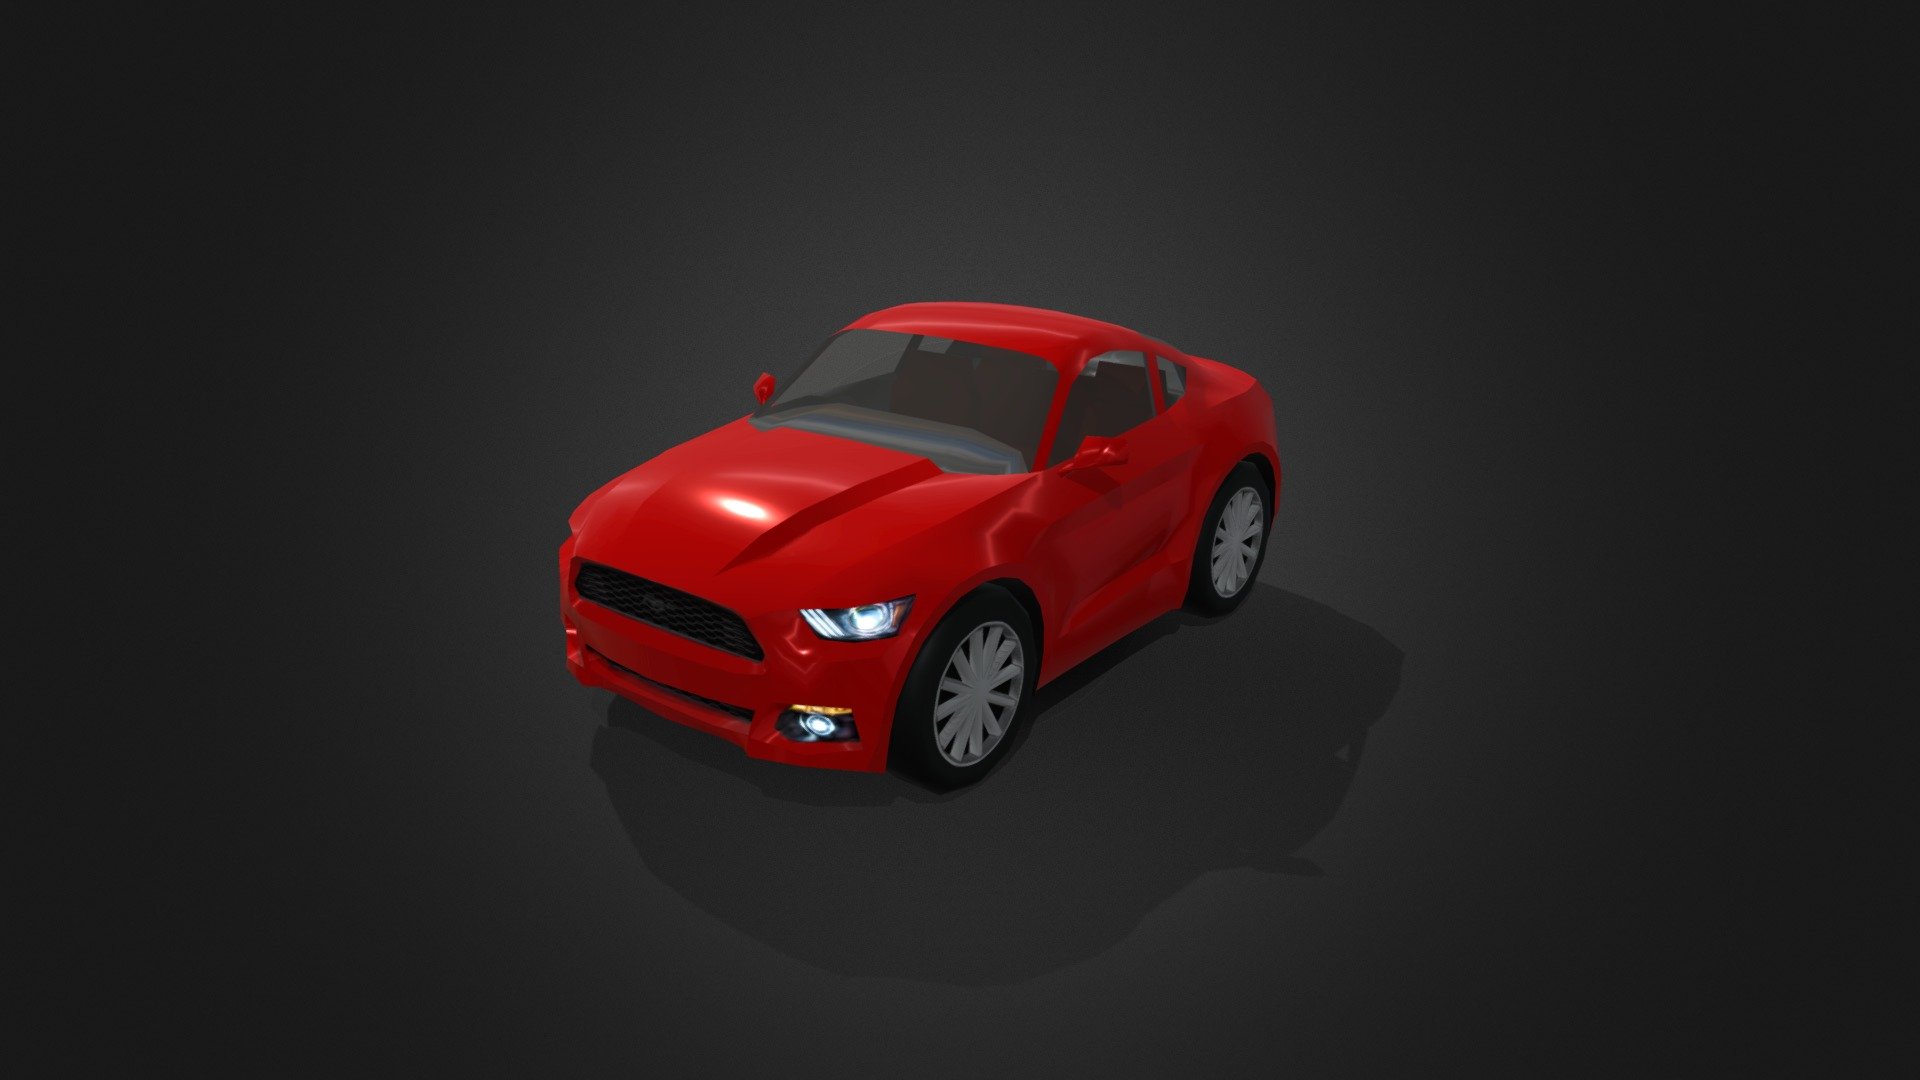 Stylized F*rd Mustang GT 2015